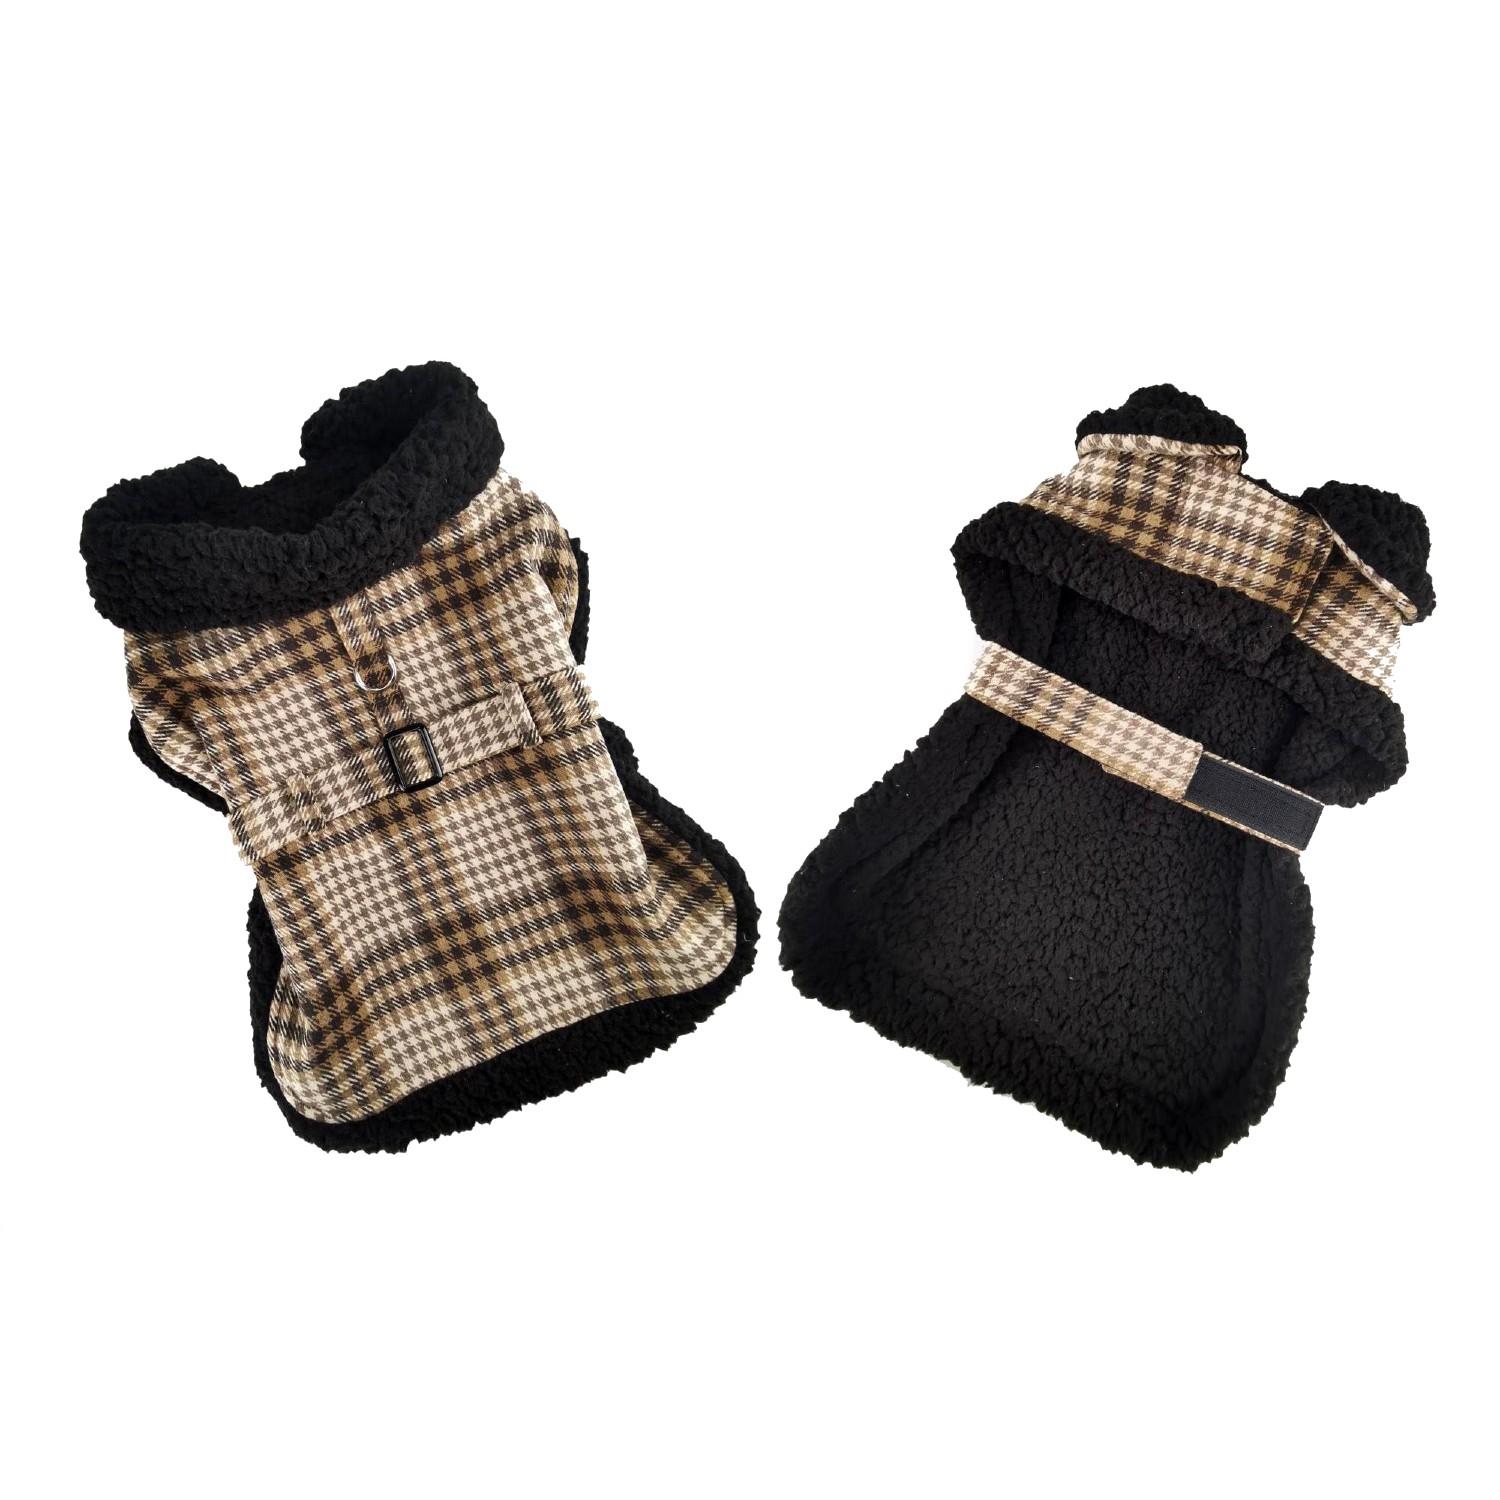 Doggie Design Plaid Sherpa Lined Dog Harness Coat - Brown & White